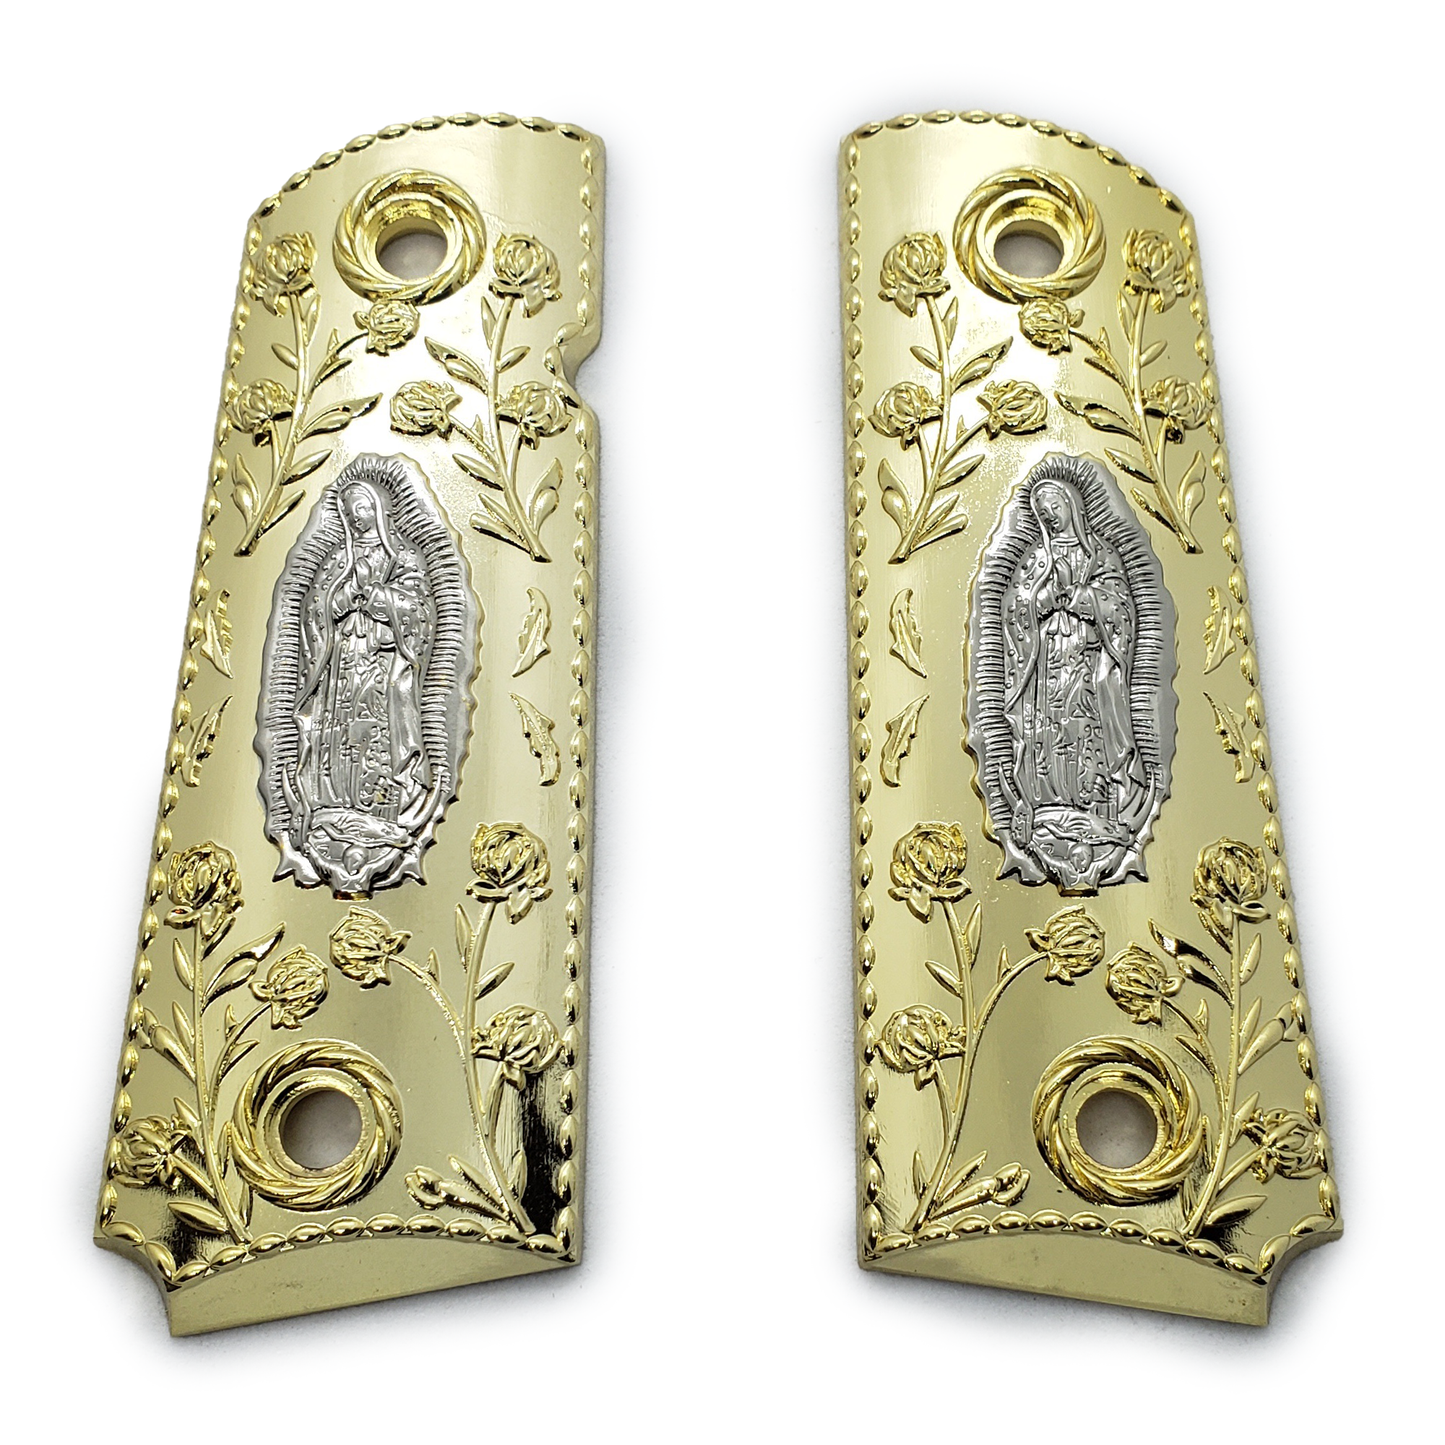 1911 GRIPS FULL SIZE - Metal - Virgin Mary Scroll W Ambi Safety #T-VM02